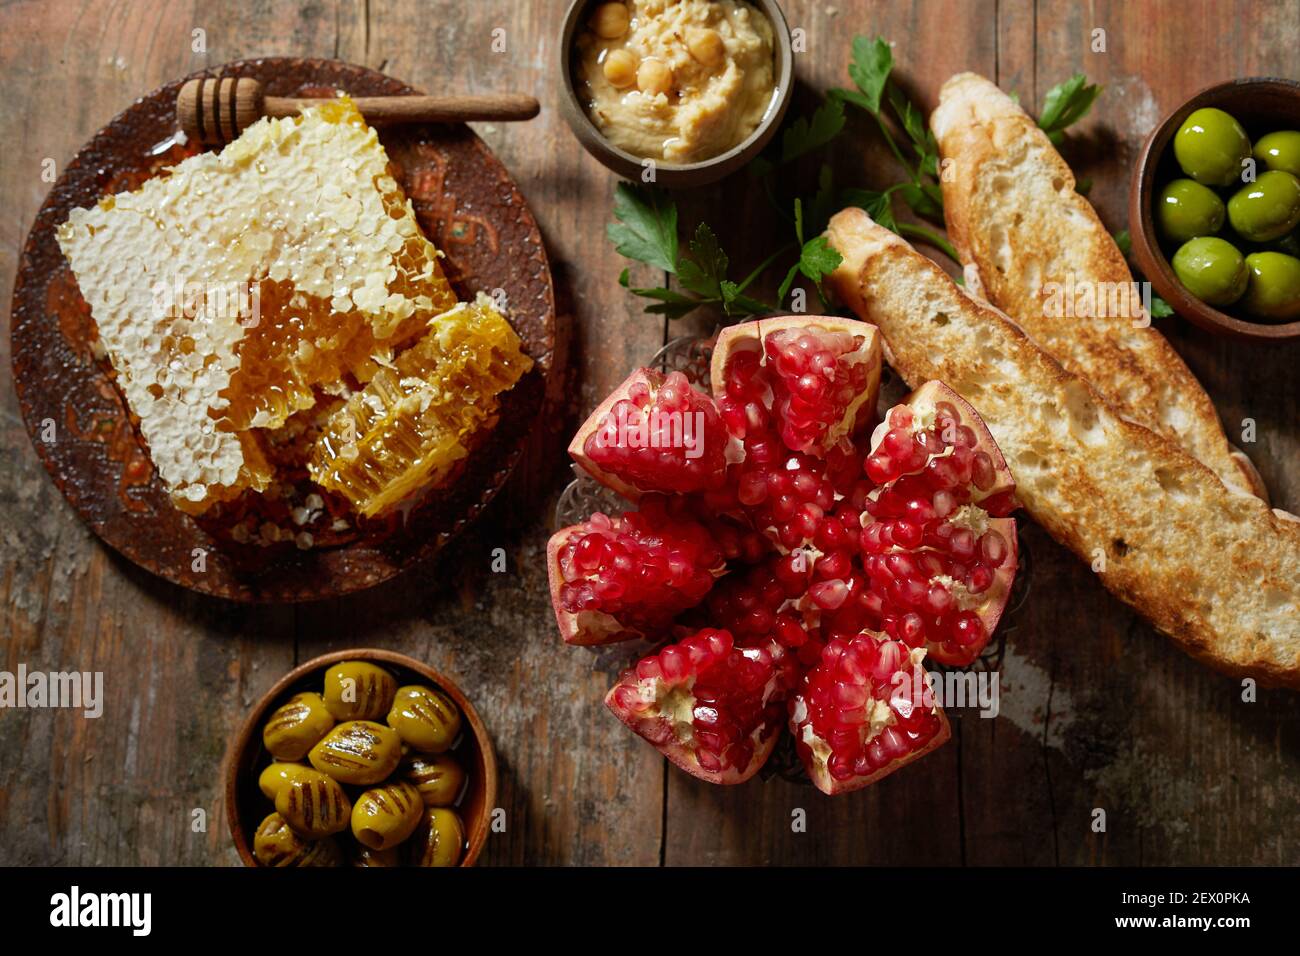 From above half of pomegranate and sweet honeycomb placed on wooden rustic table near olives and baguette toast with hummus Stock Photo